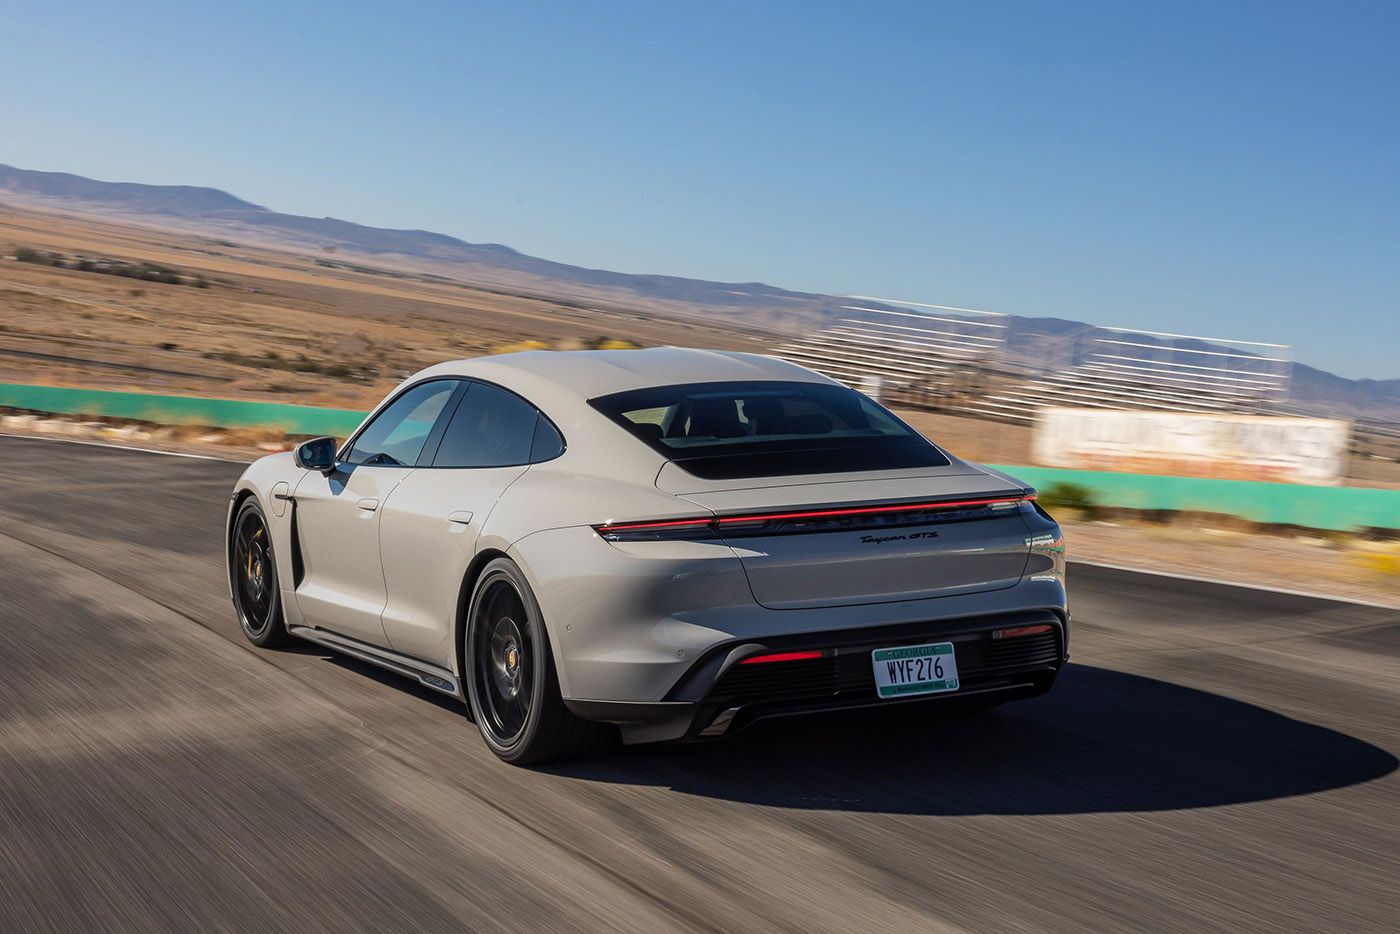 2023 Porsche Taycan Gains Range and Faster Charging Car Detail Guys